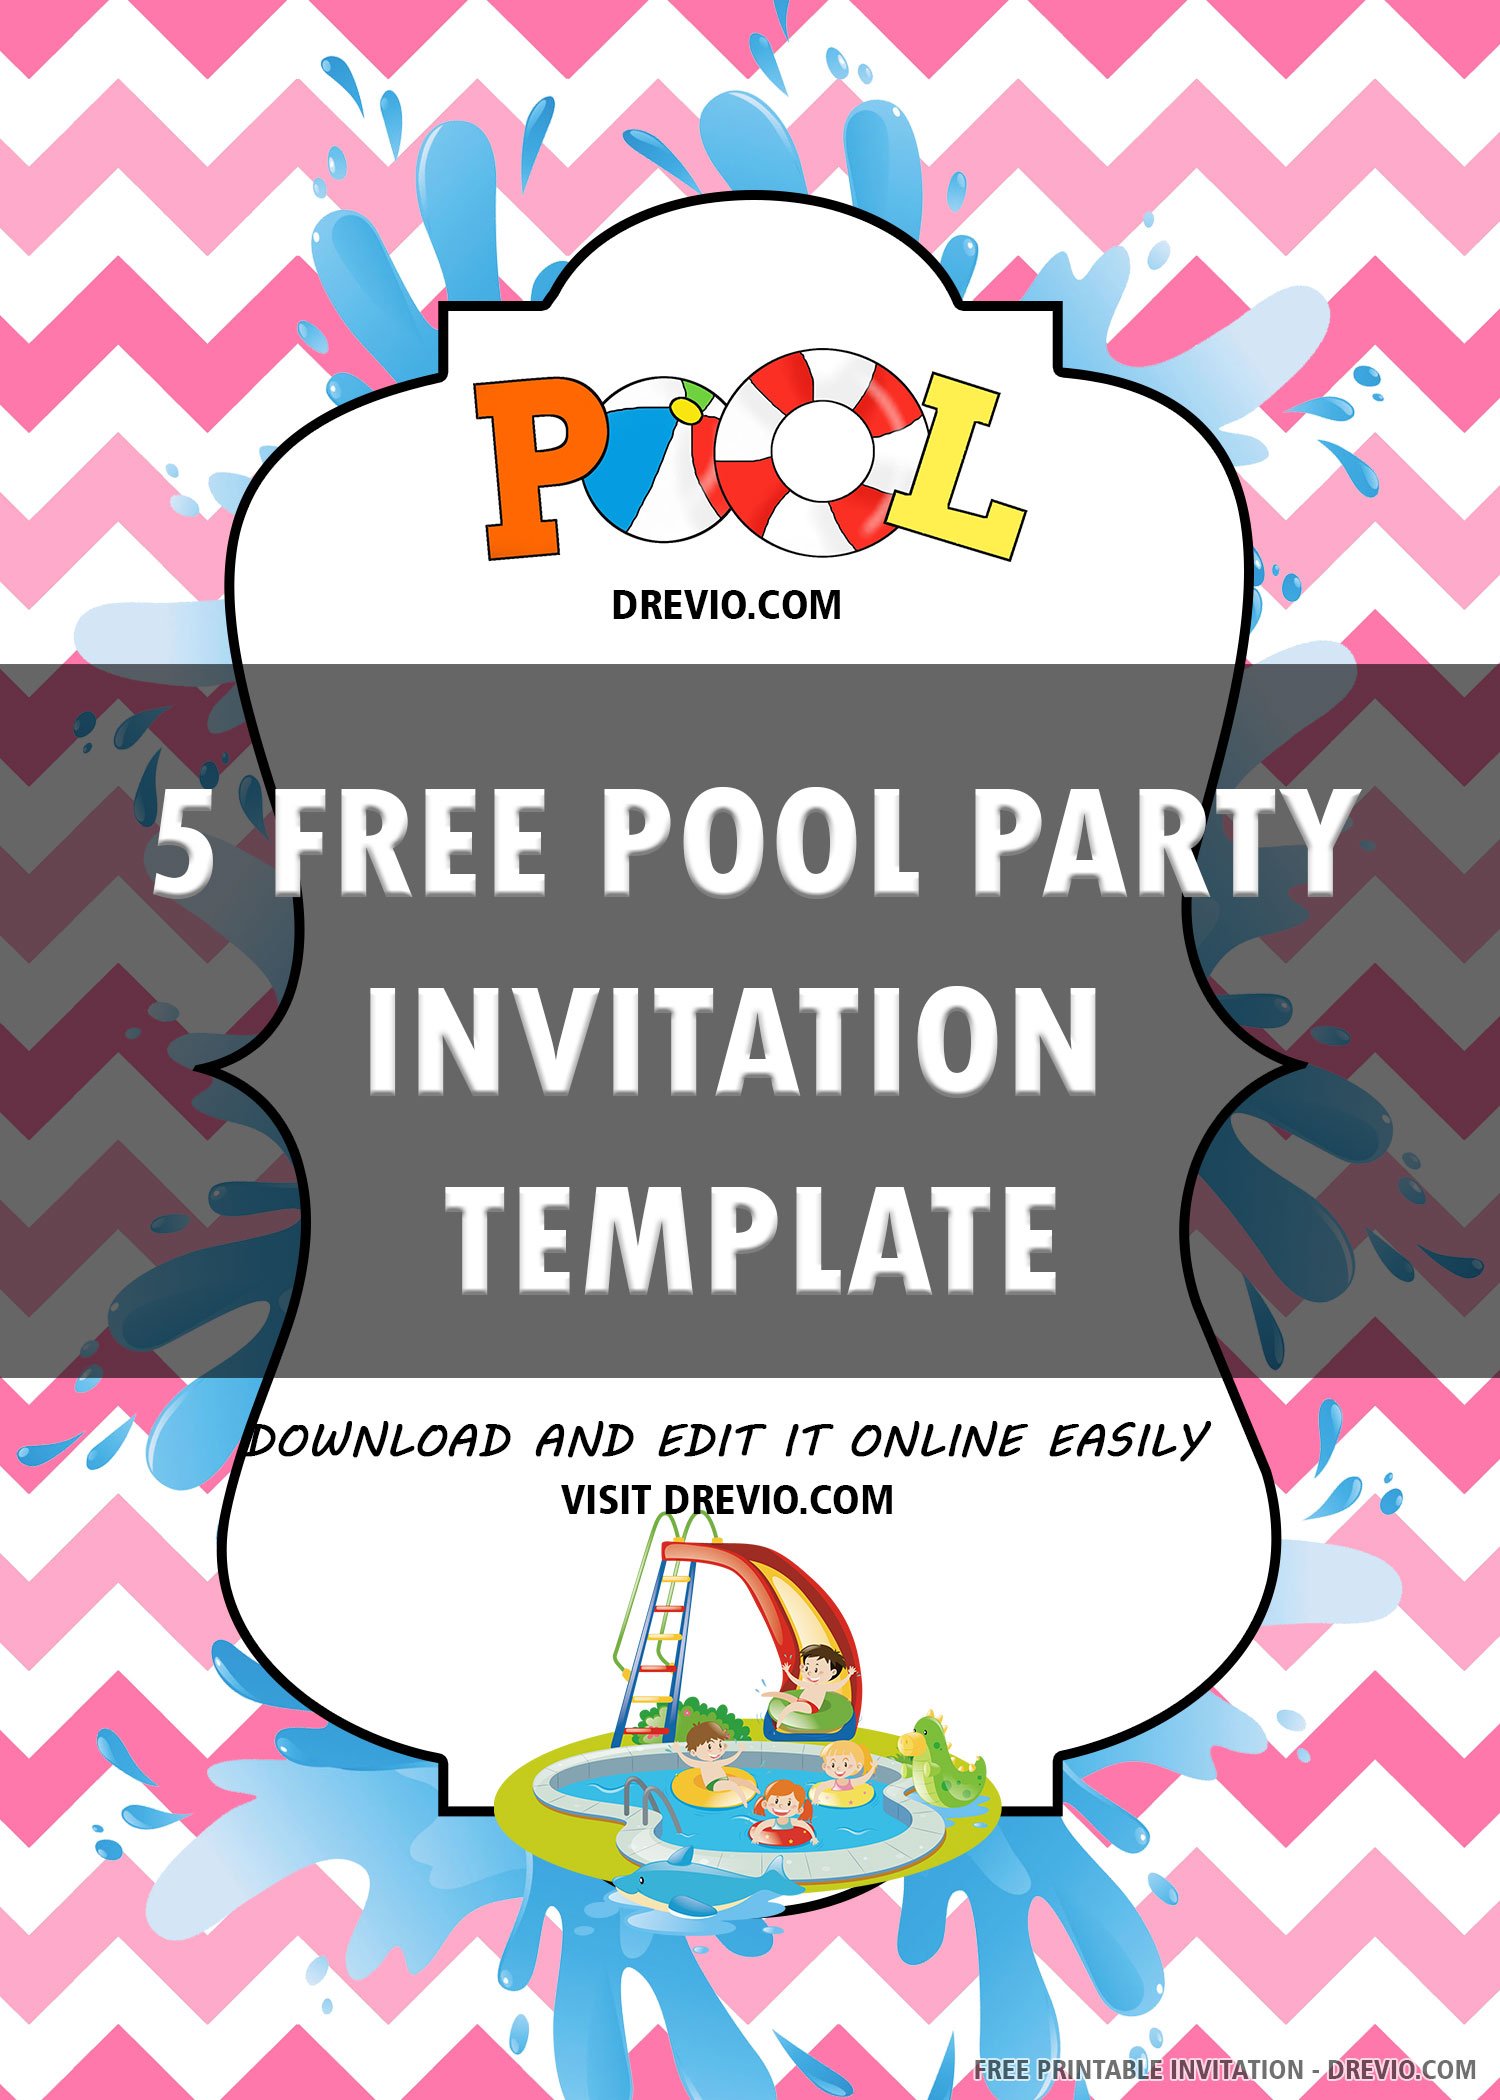 Free Printable Pool Party Invitation Templates Download Hundreds FREE